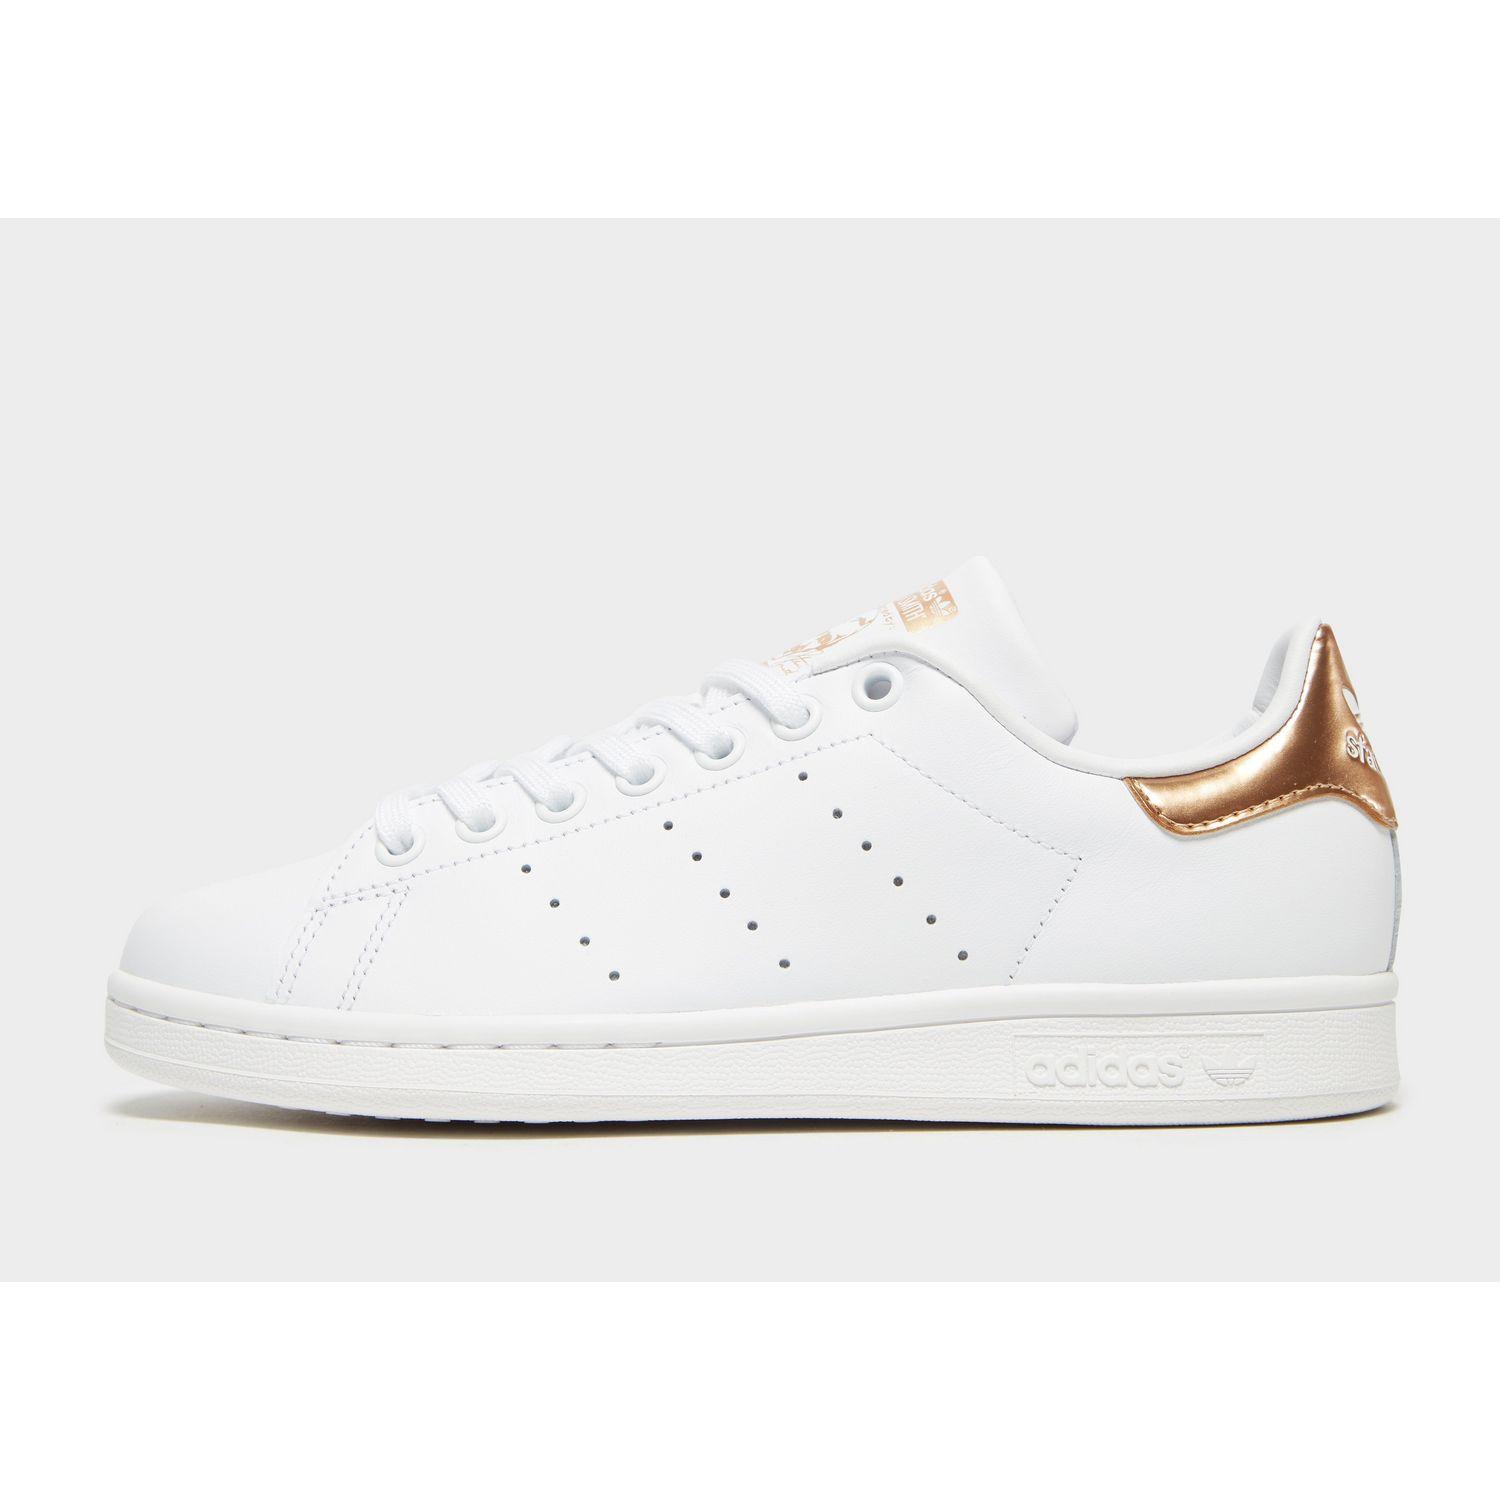 adidas Originals Leather Stan Smith in 